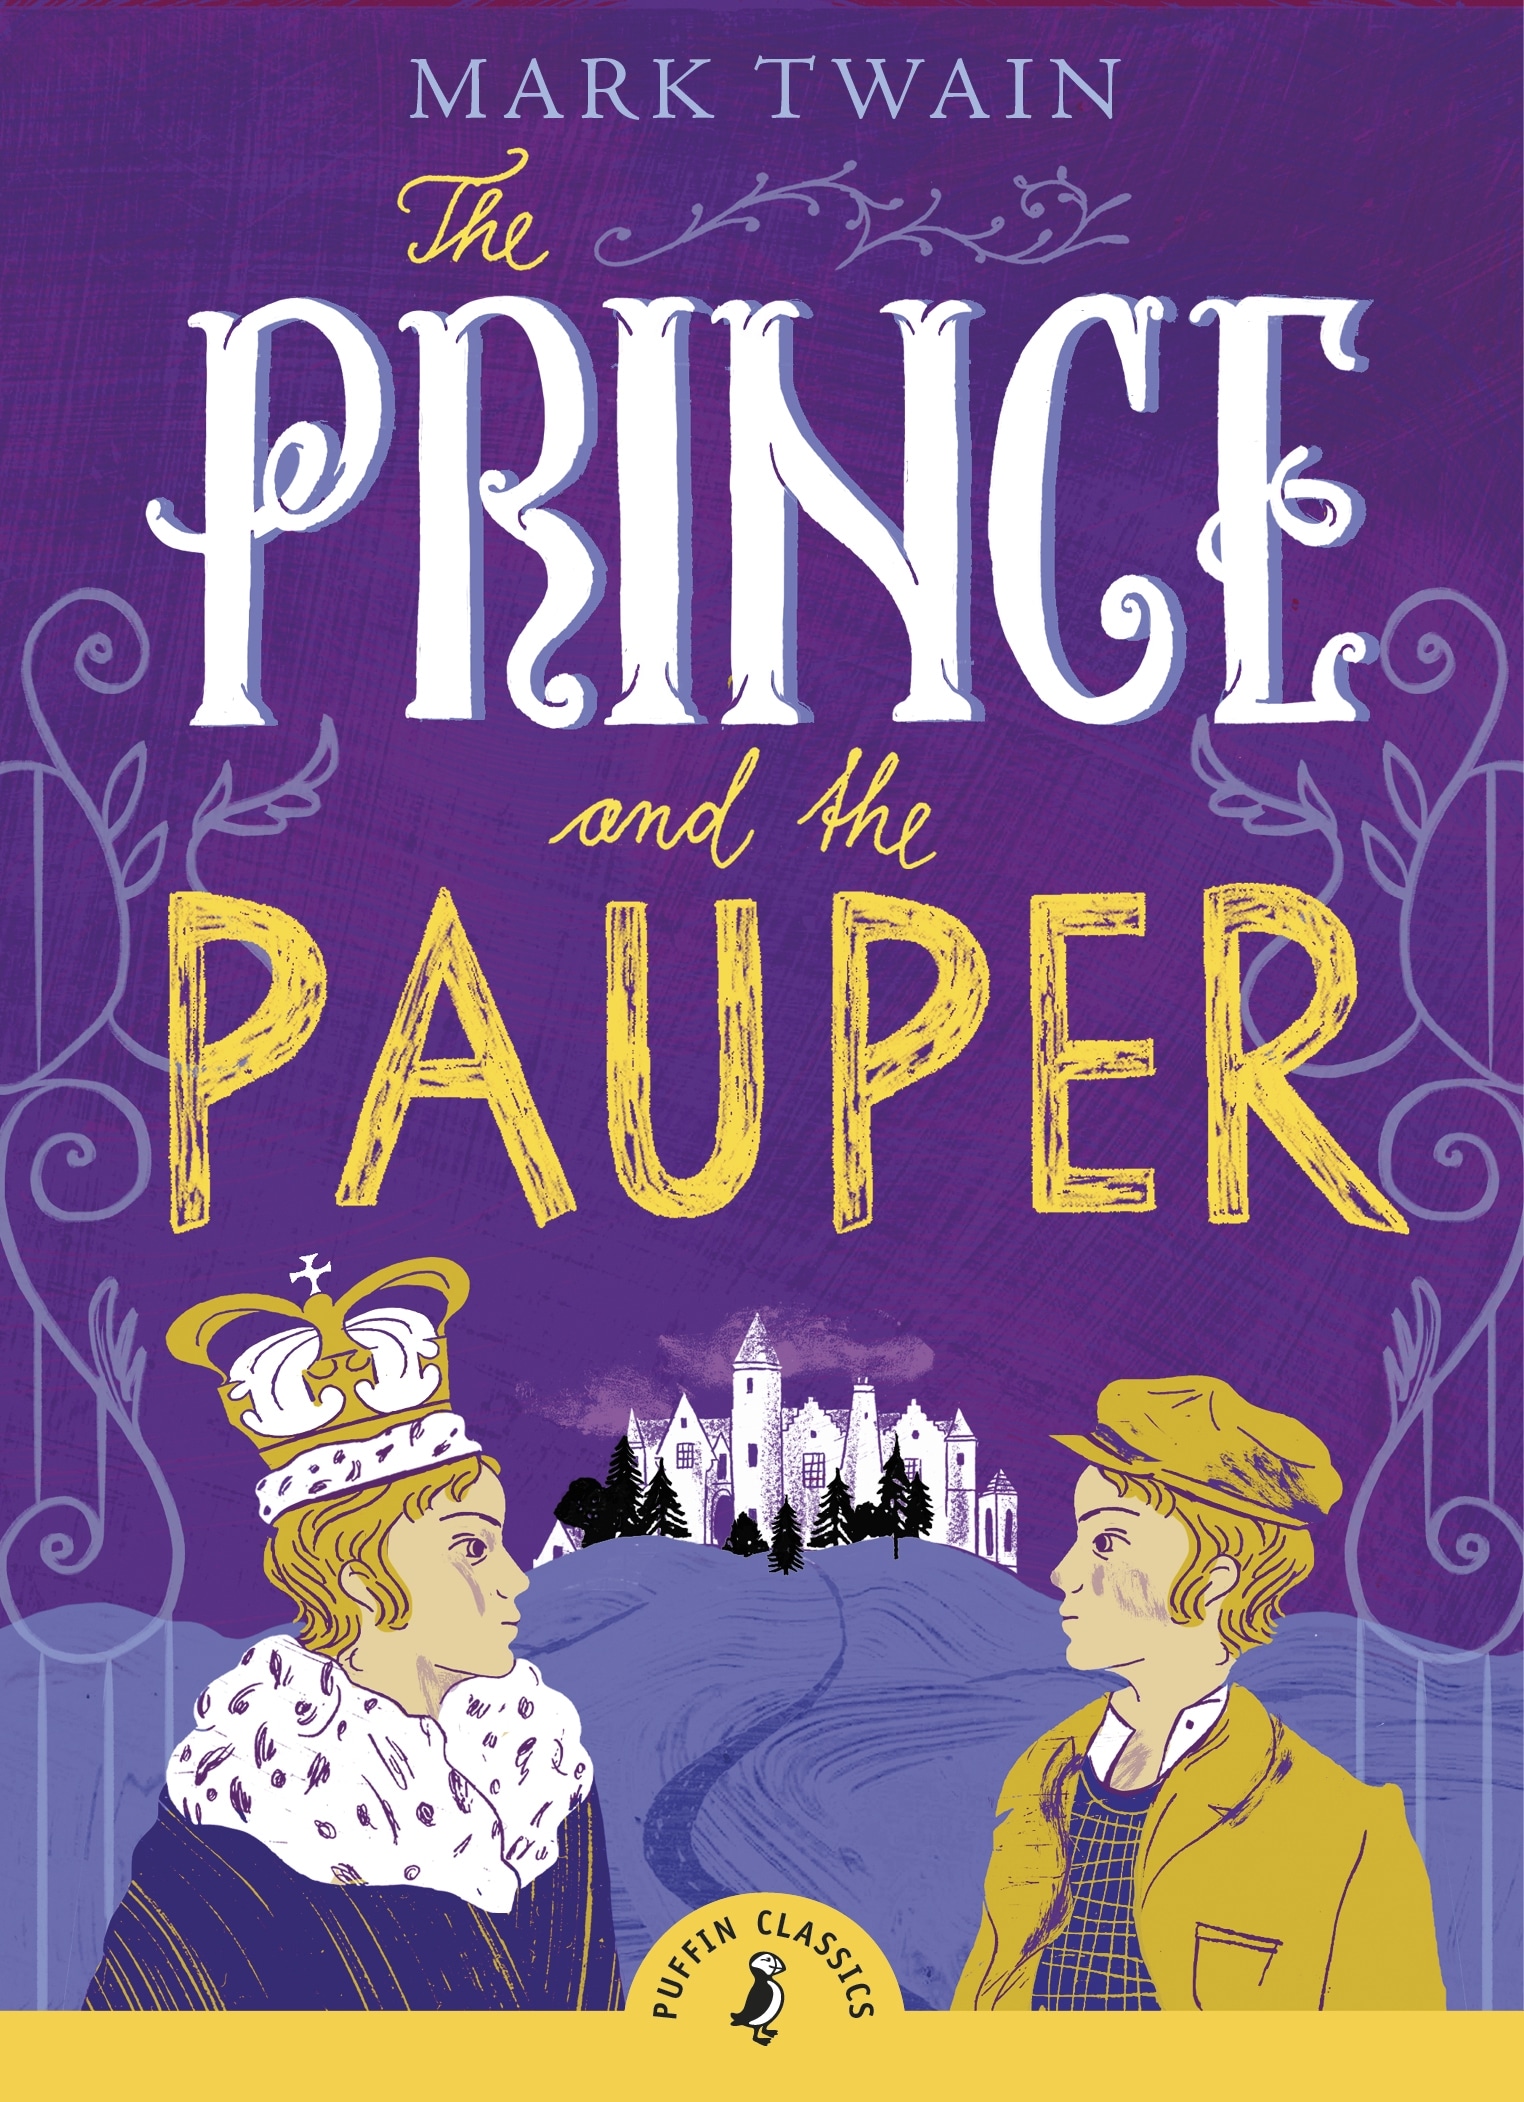 Book “The Prince and the Pauper” by Mark Twain — September 19, 2019